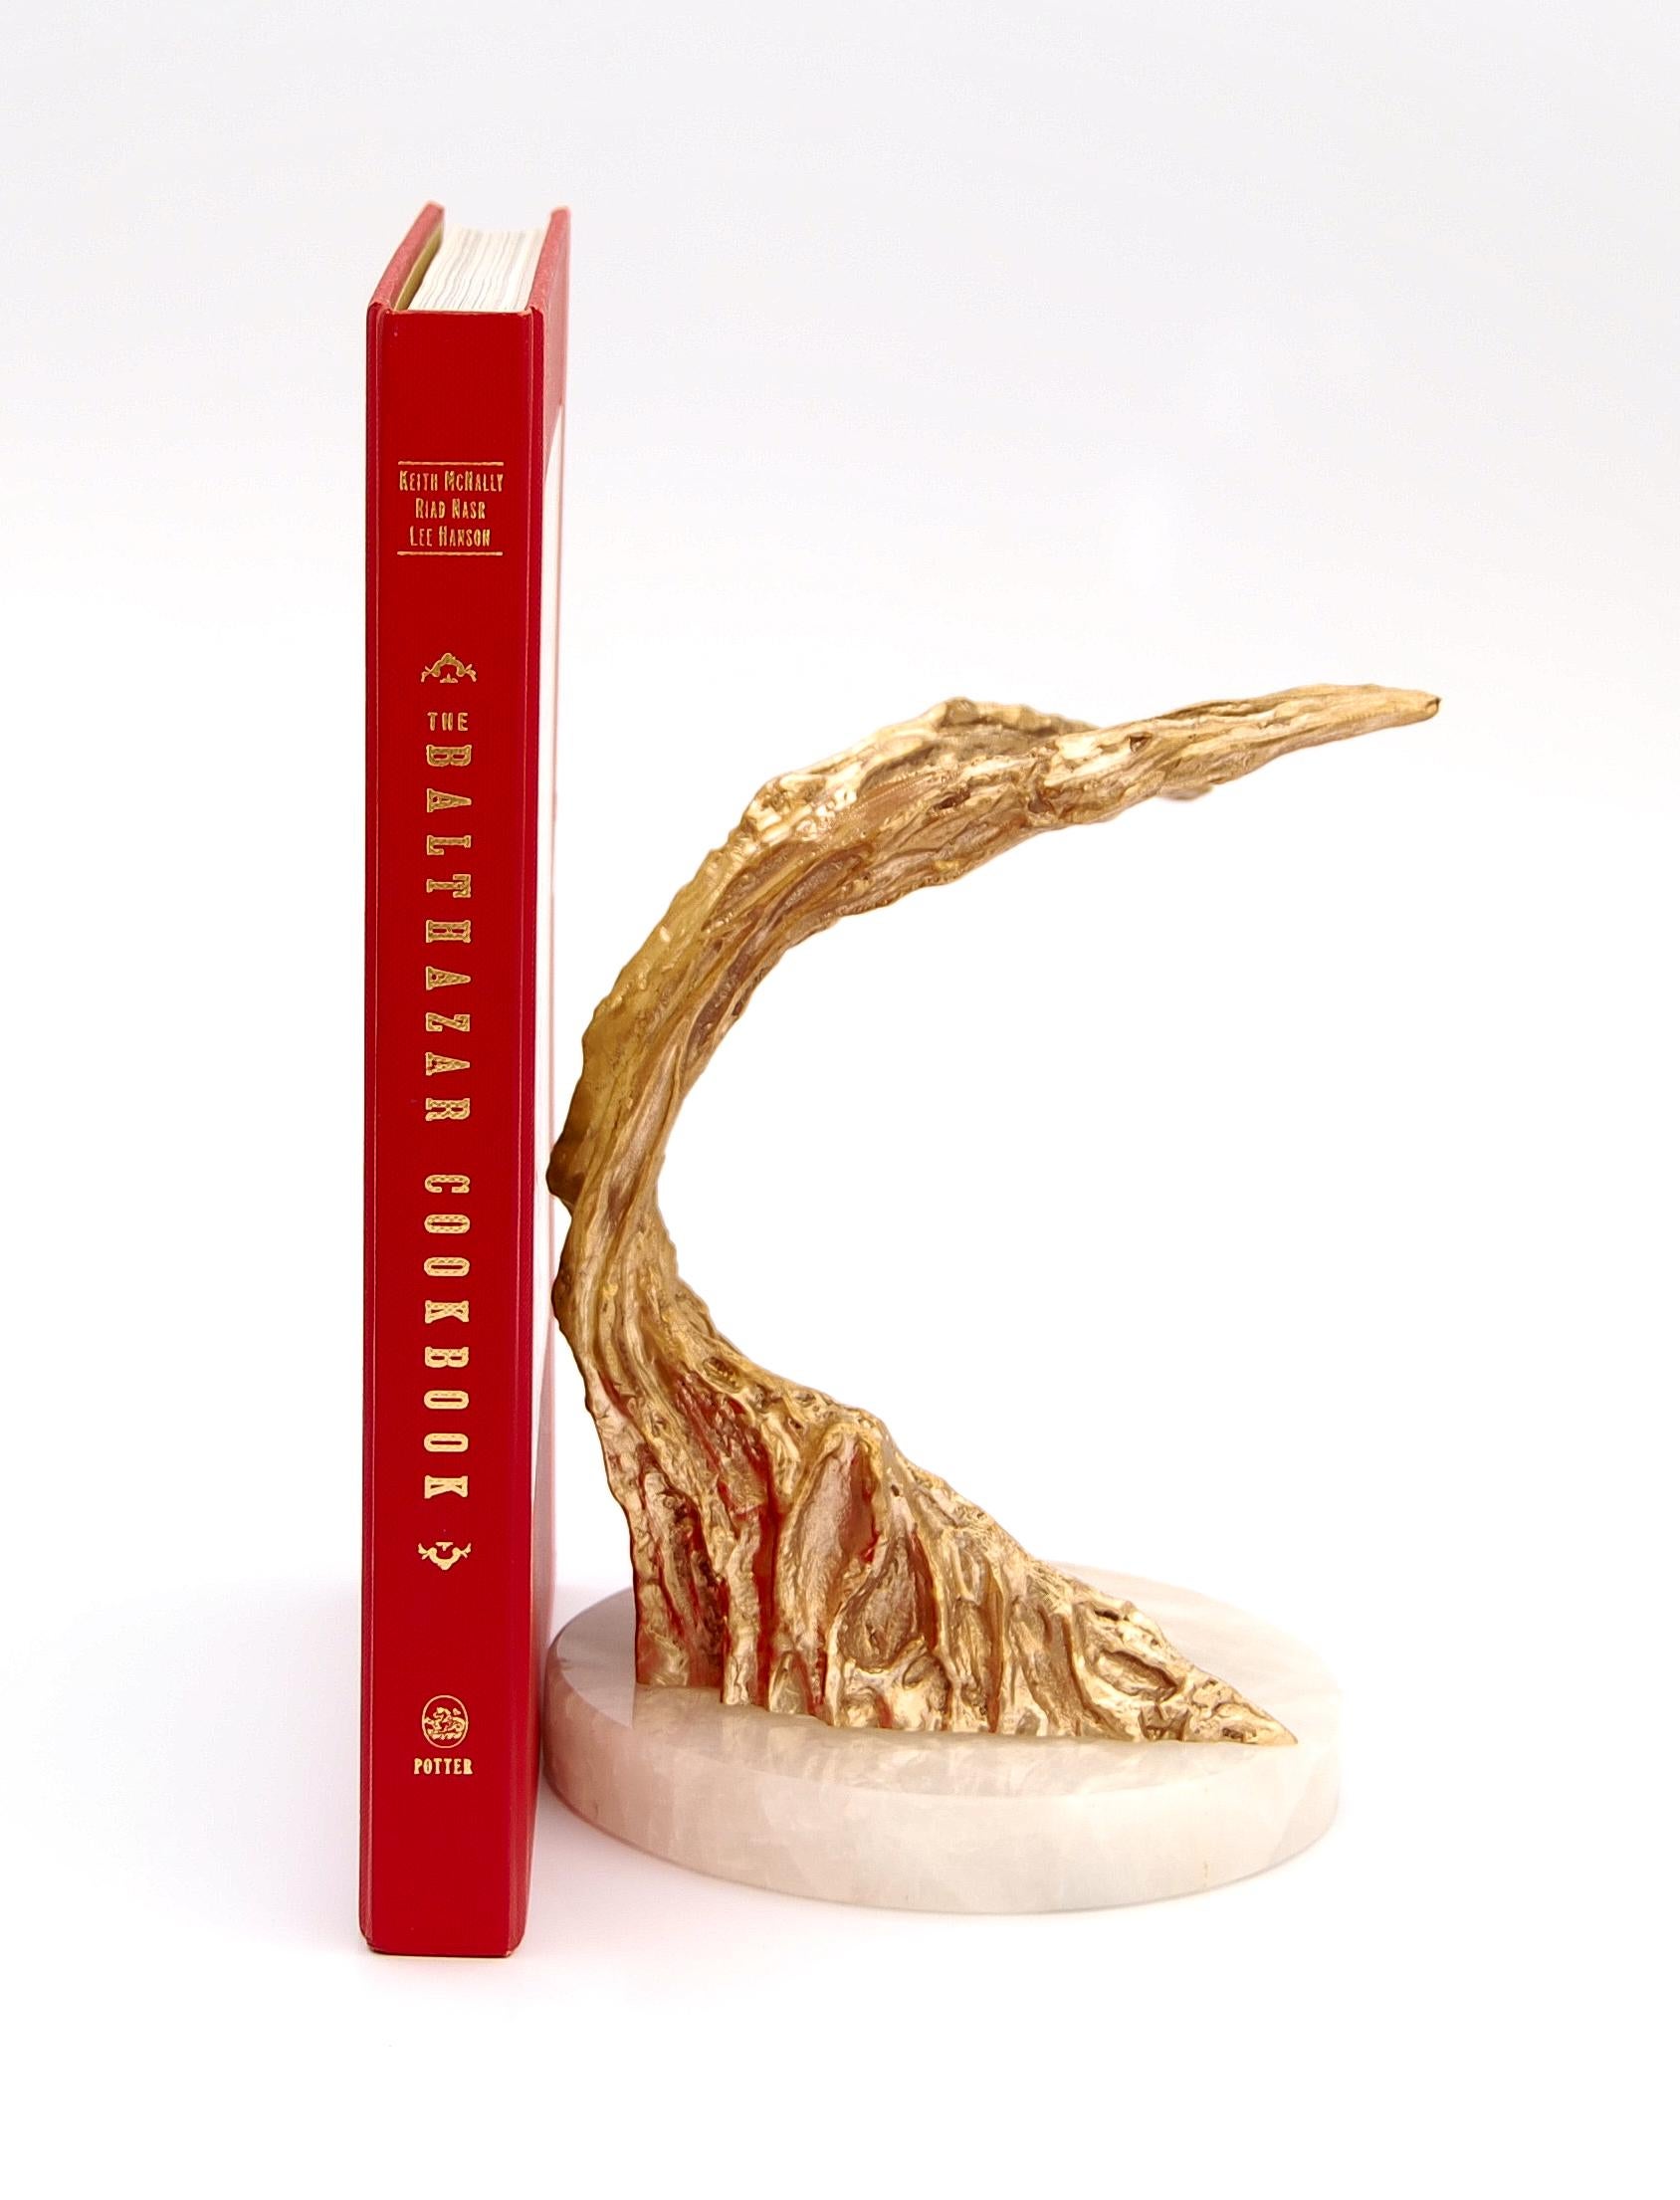 Other John Lee 2 Bookend with Onyx base by Fakasaka Design